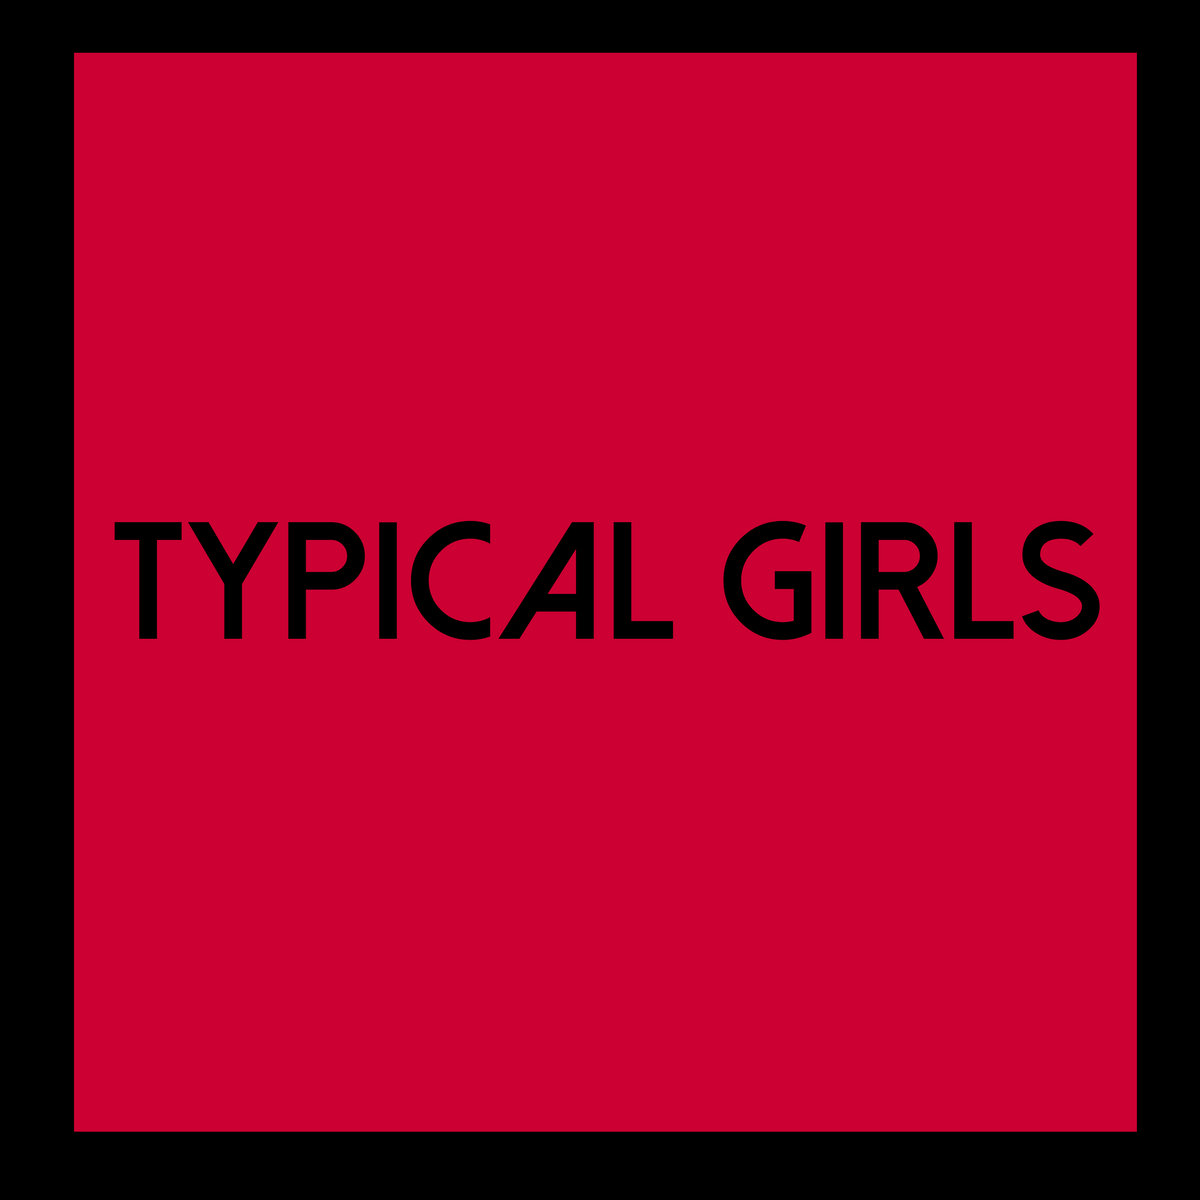 STEREO EMBERS EXCLUSIVE – “Typical Girls, Volume 6” from the essential Emotional Response label, w/track-by-track commentary from ace compiler Camylle Reynolds